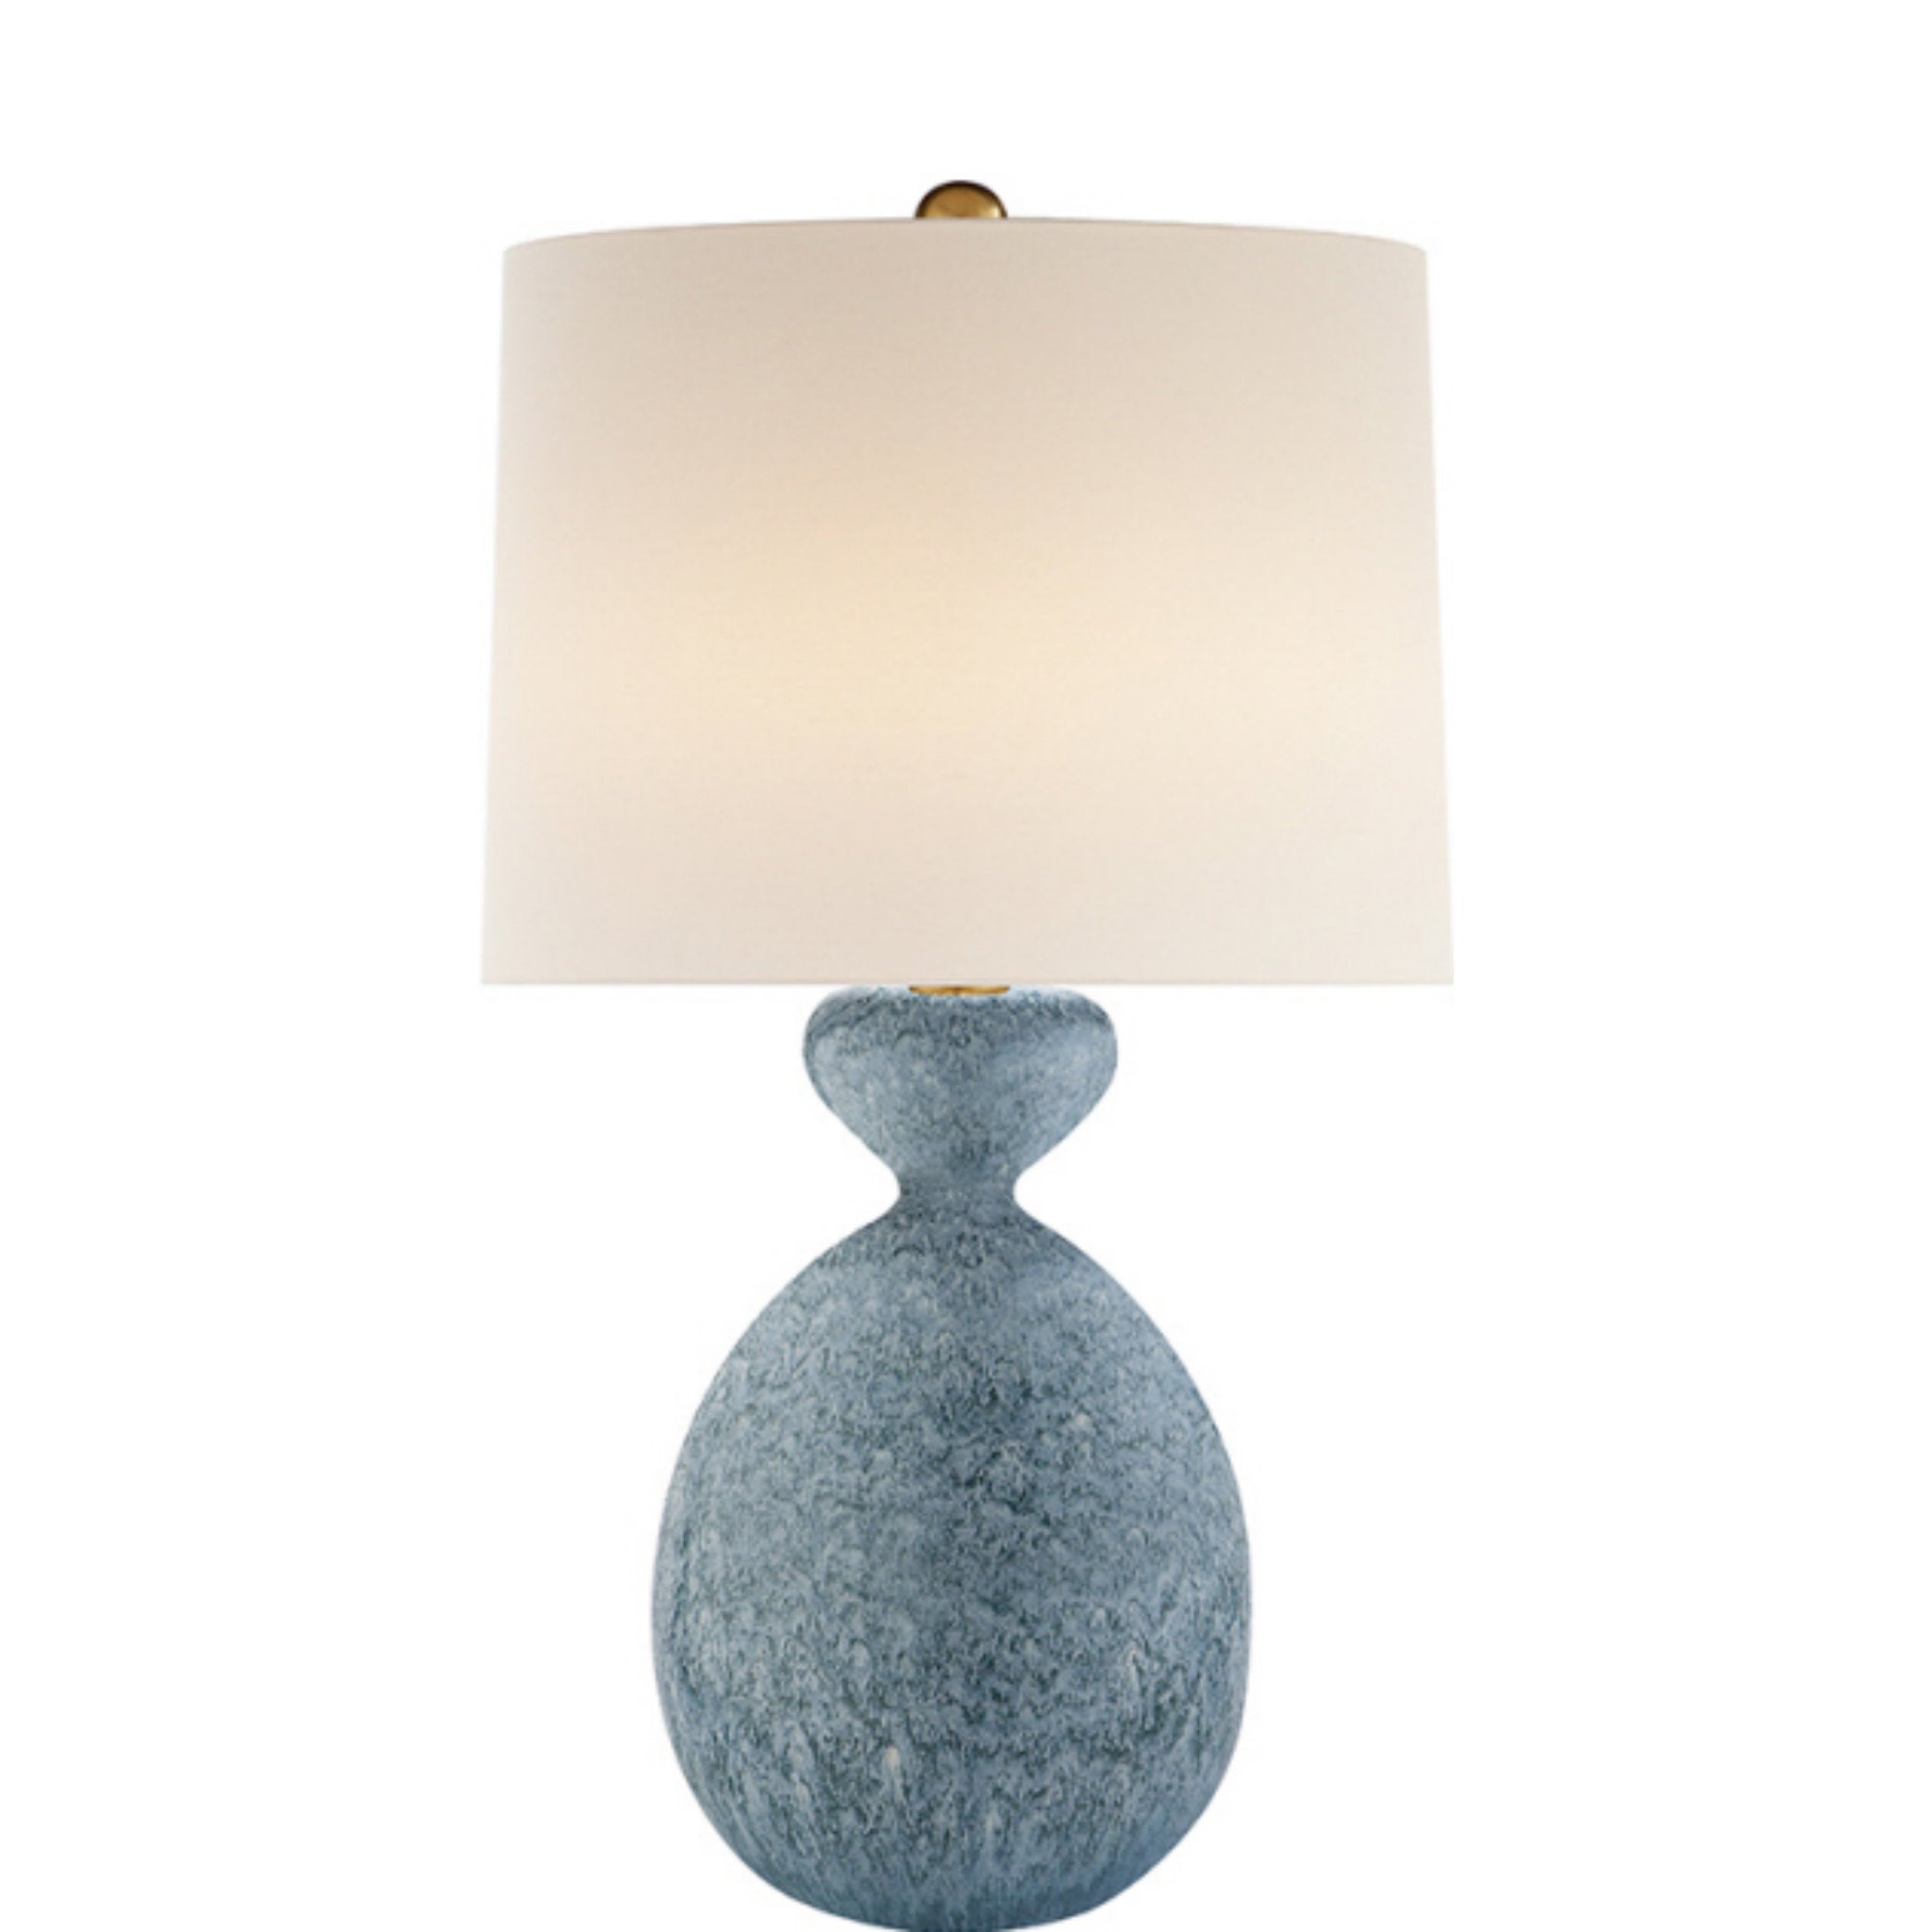 AERIN Gannet Table Lamp in Blue Lagoon with Linen Shade